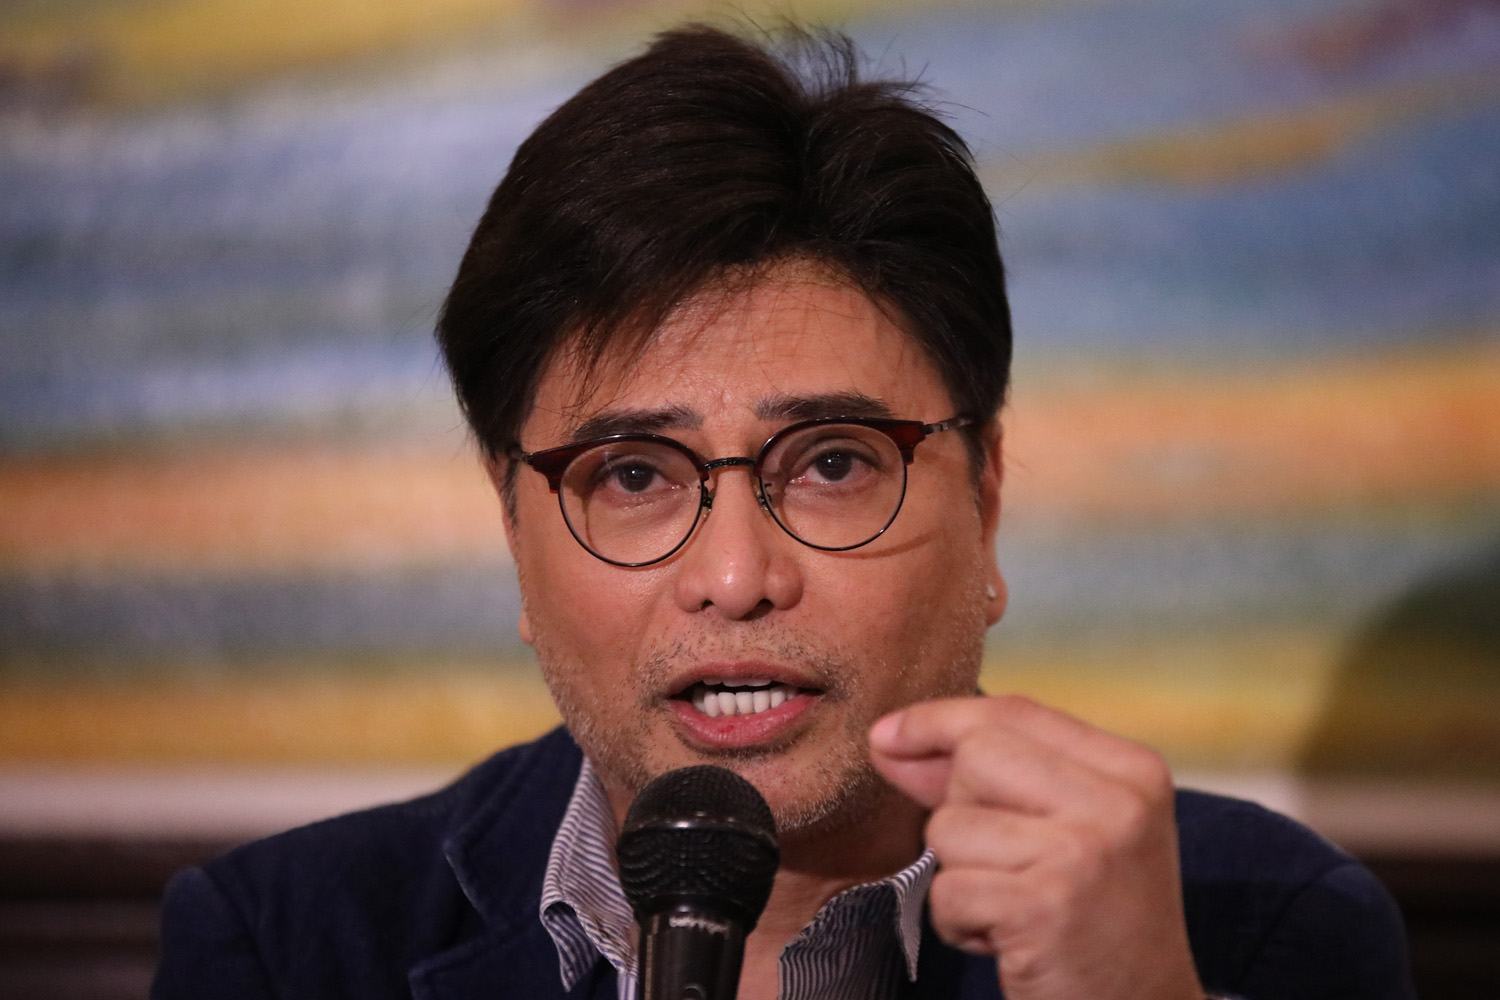 RESIGNATION. Overseas Workers Welfare Administration Deputy Administrator Arnell Ignacio announces his resignation from the government agency in a press conference in Quezon City on February 27, 2019. Photo by Darren Langit/Rappler 